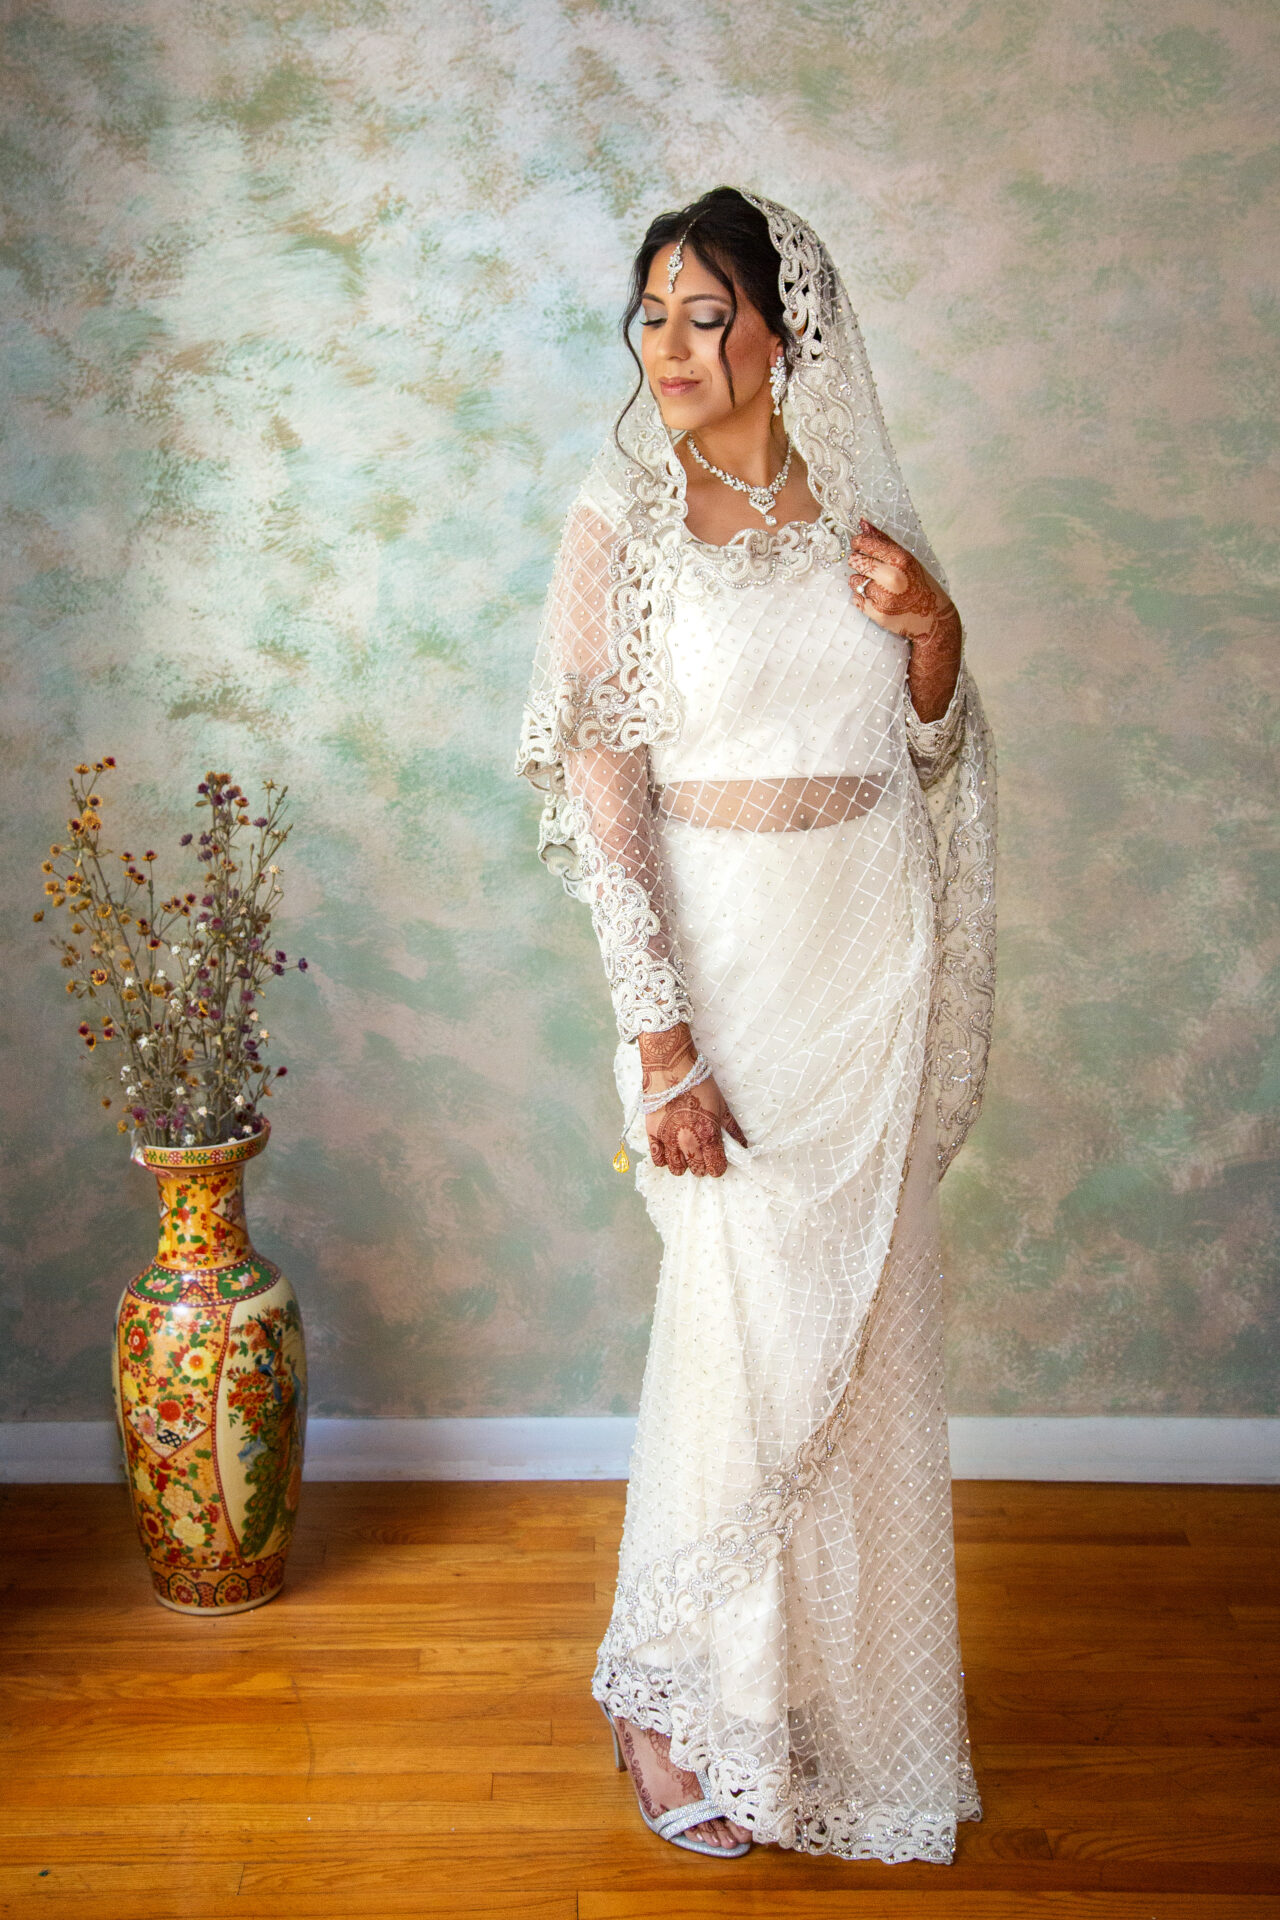 South Asian Wedding photo of a happy bride by Astrapia Photography